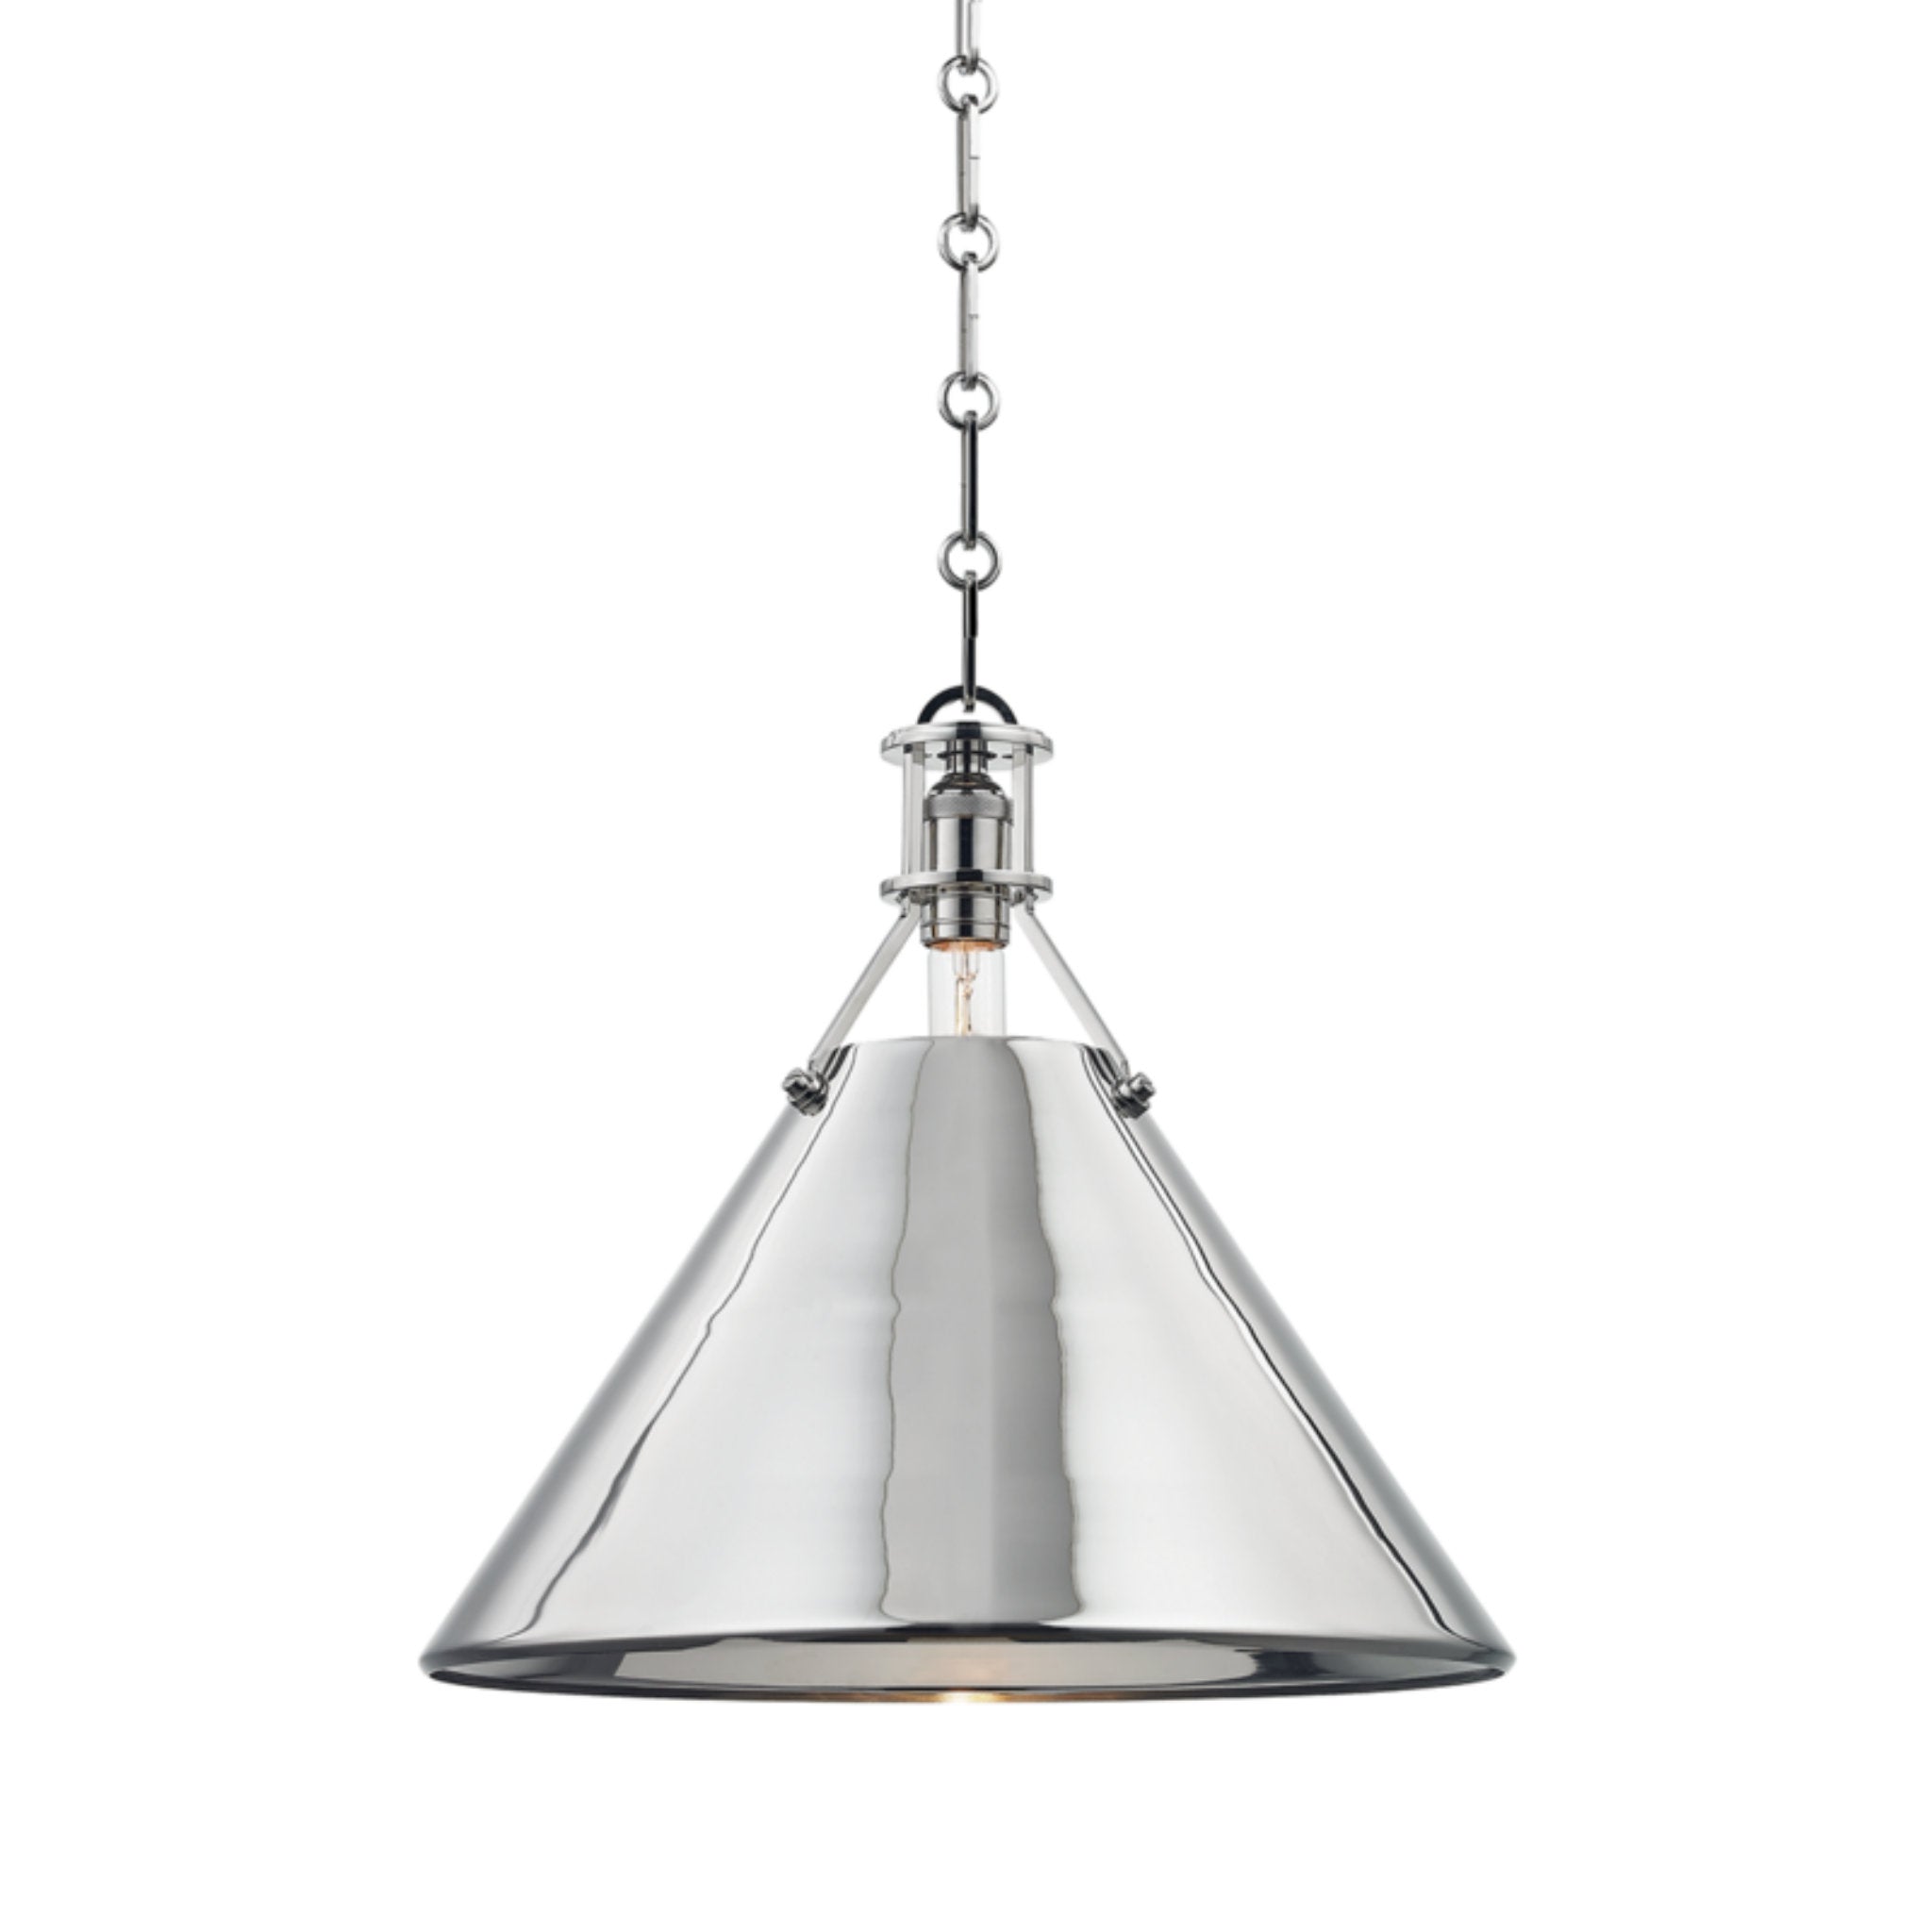 Metal No.2 1 Light Pendant in Polished Nickel by Mark D. Sikes